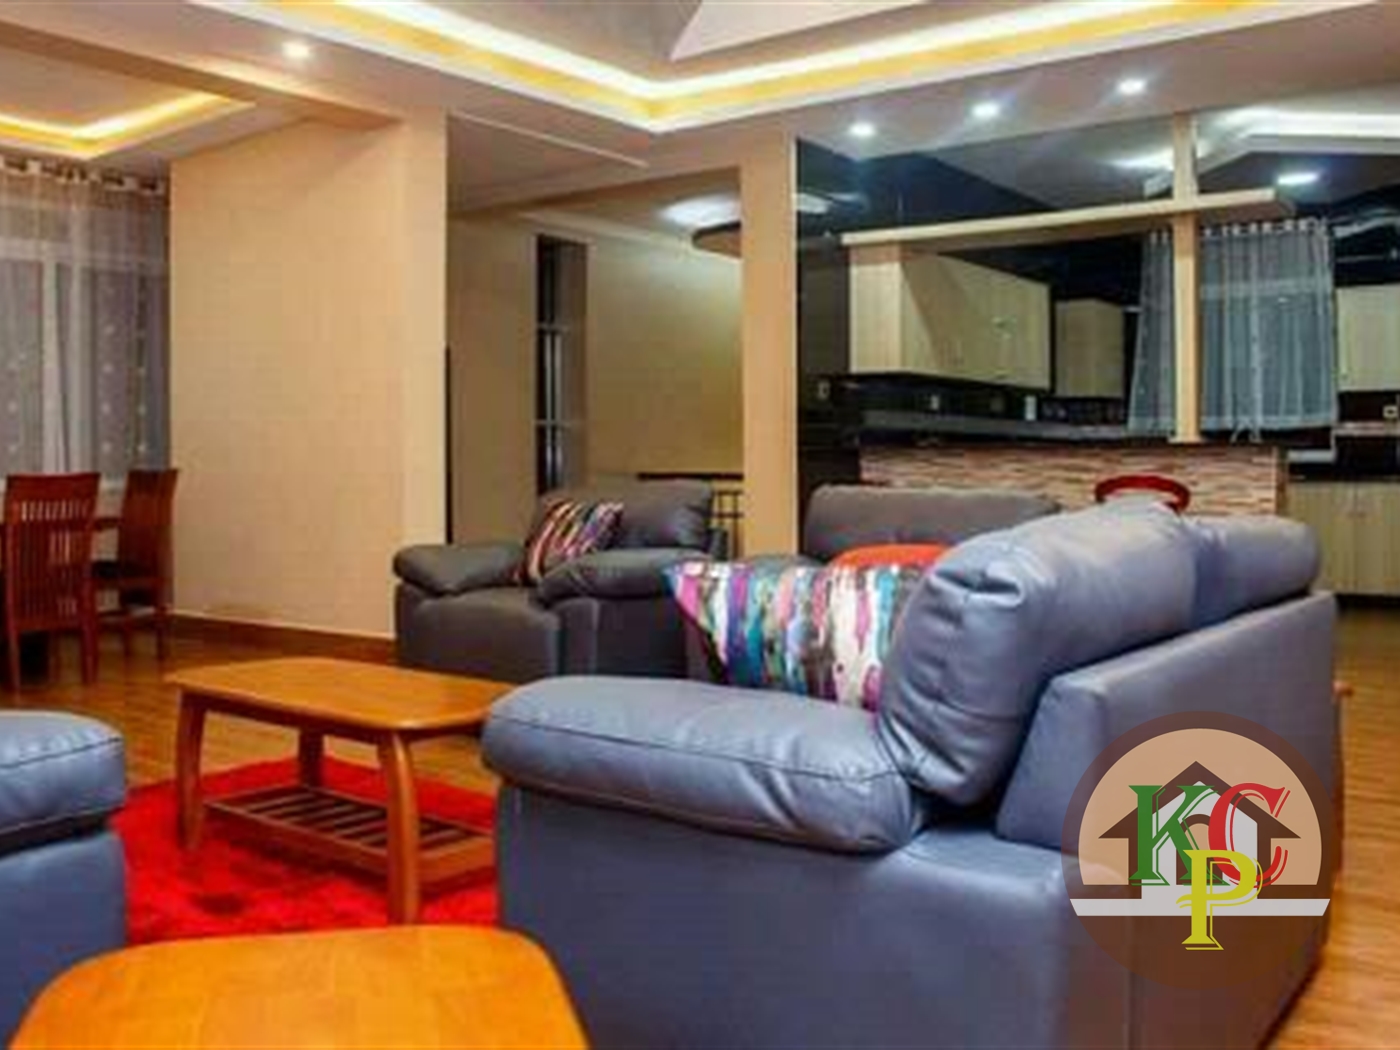 Penthouse for rent in Ntinda Kampala